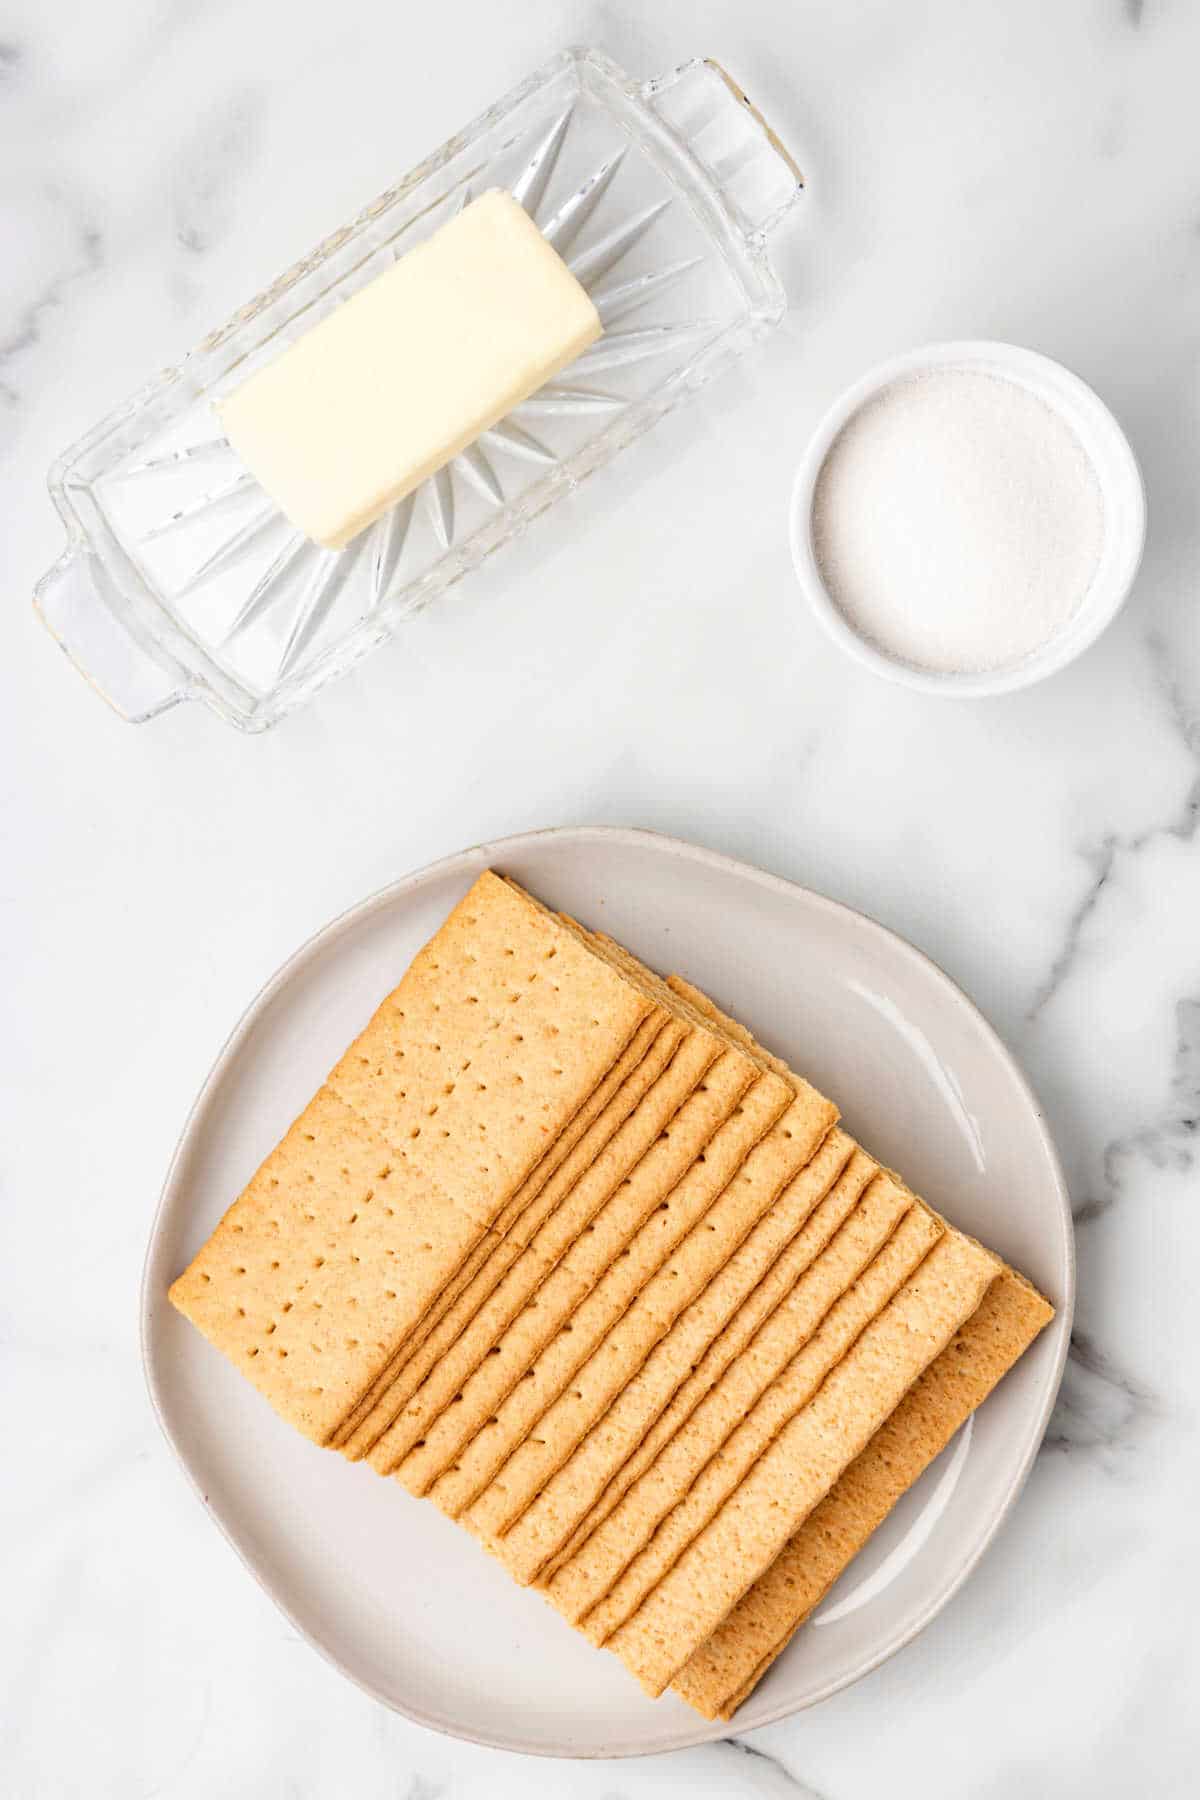 Graham crackers, sugar, and butter in dishes.